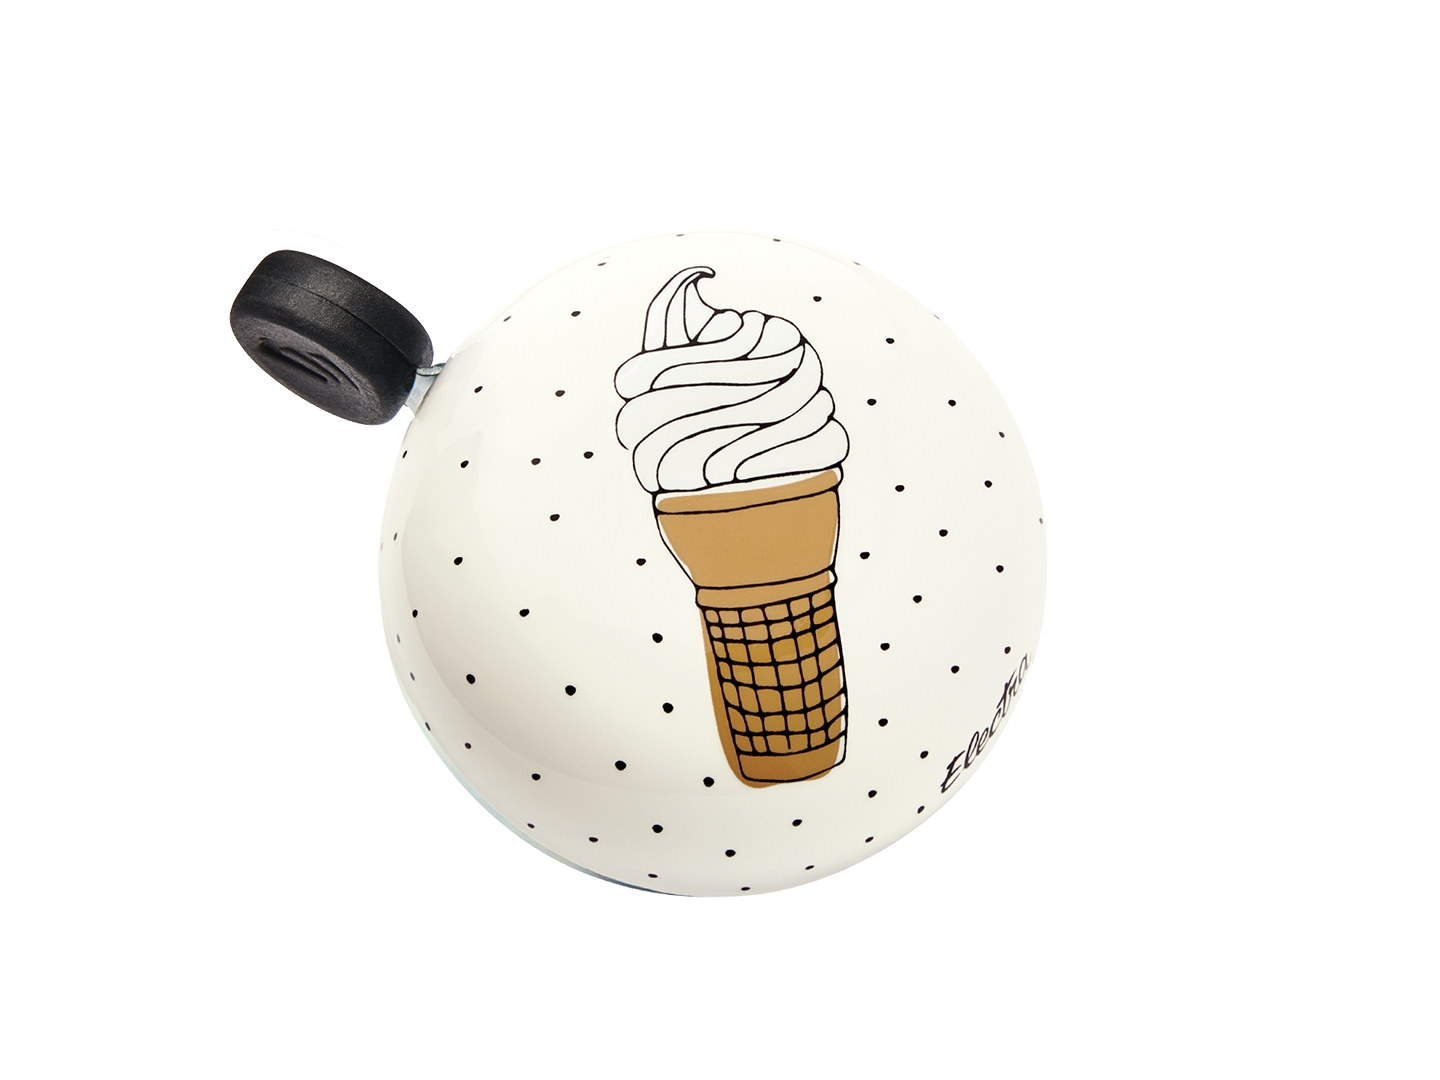 Bell Electra Domed Ringer Ice Cream